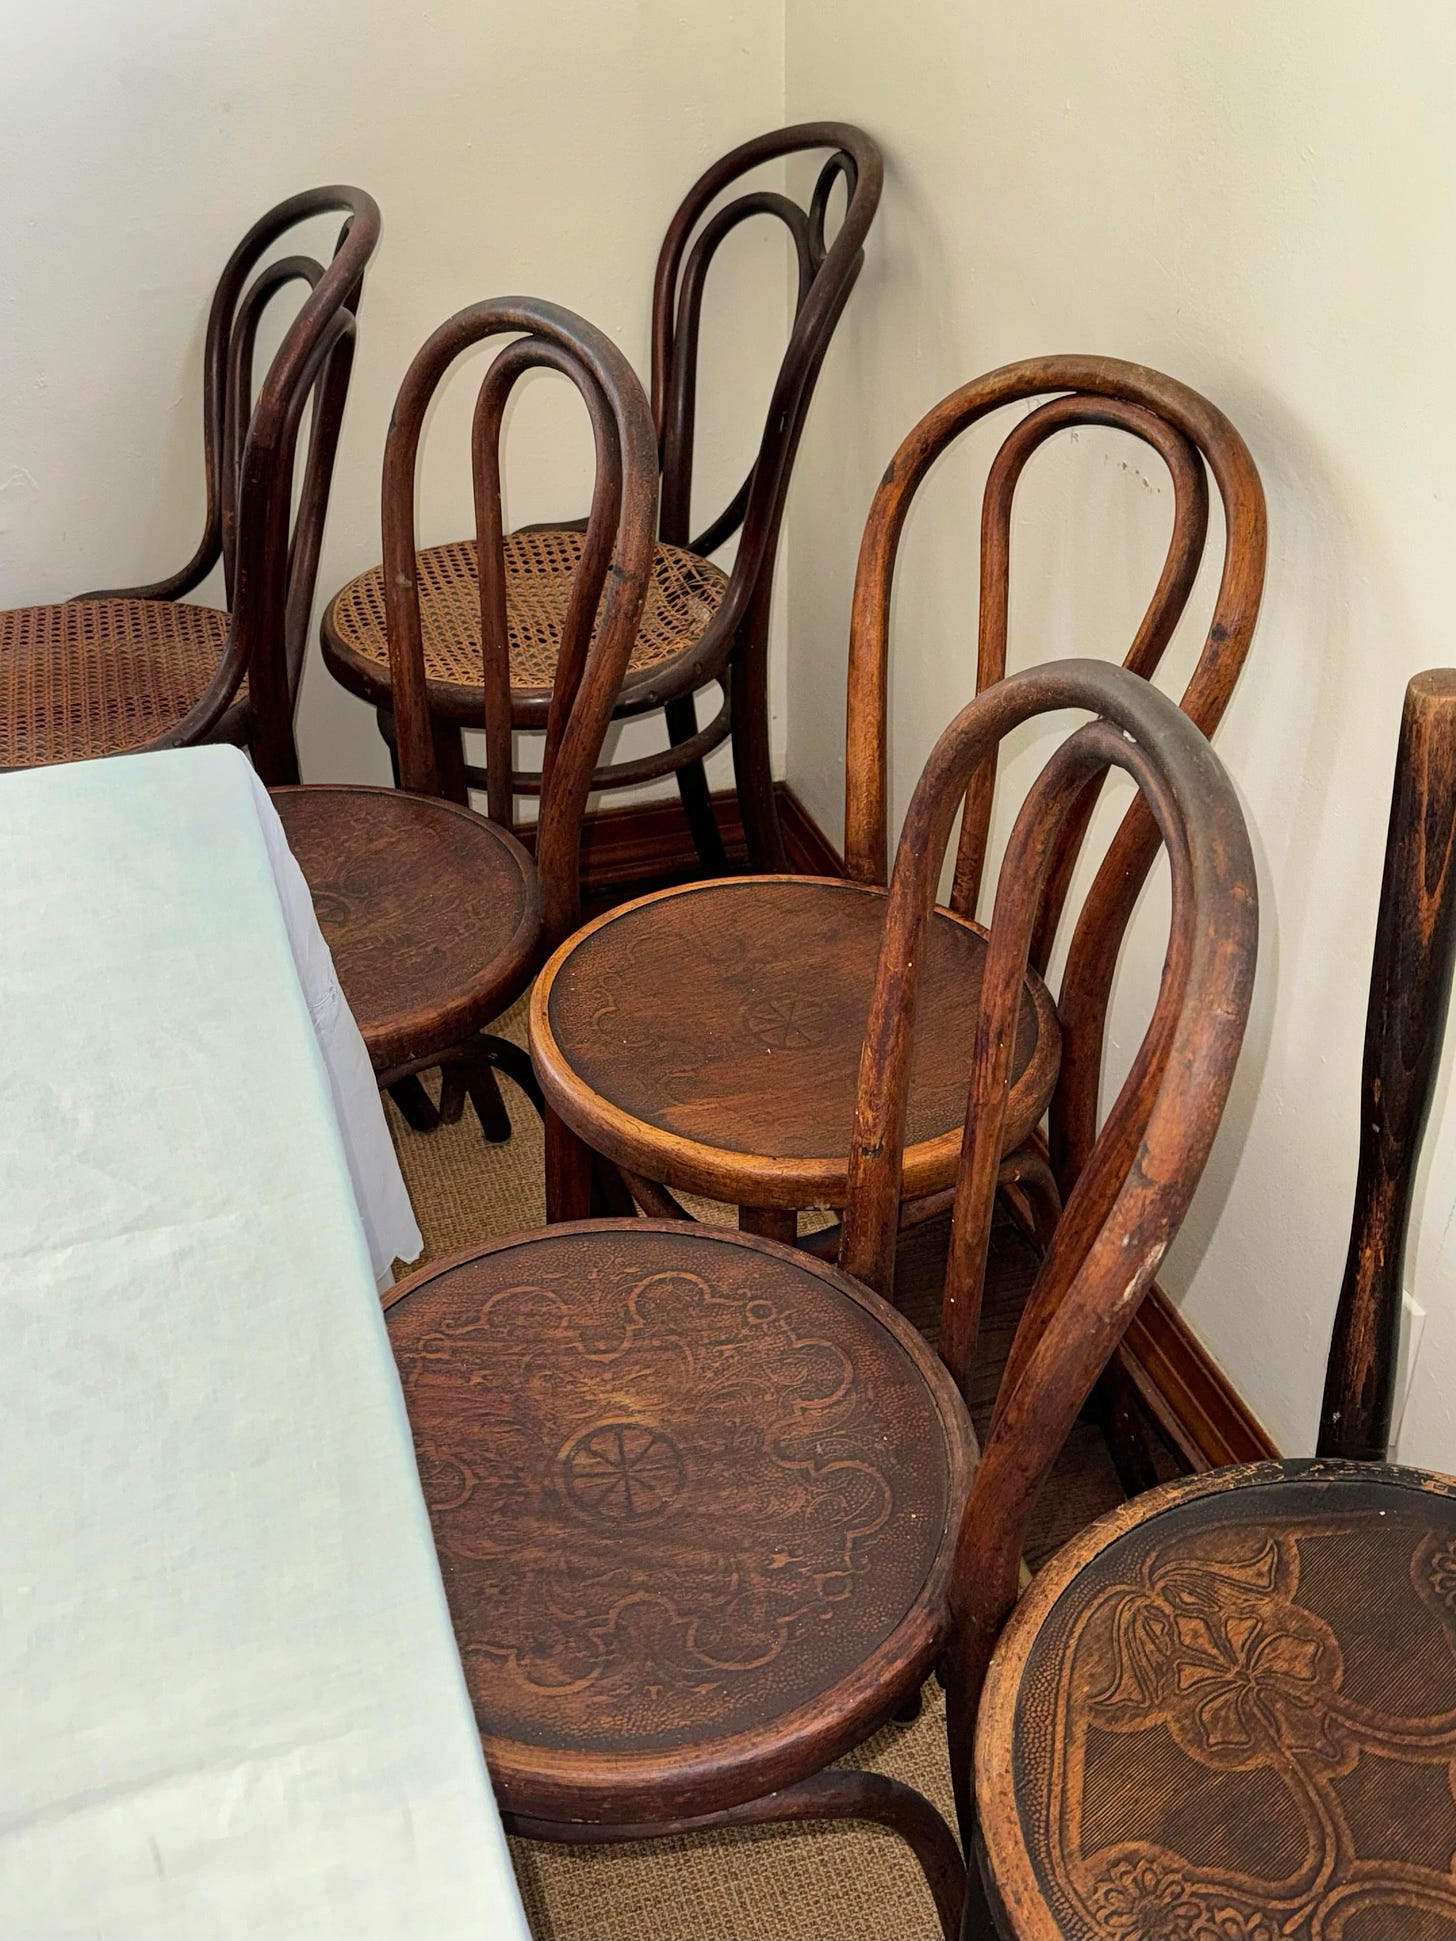 6 bentwood chairs arranged in a corner of a room.